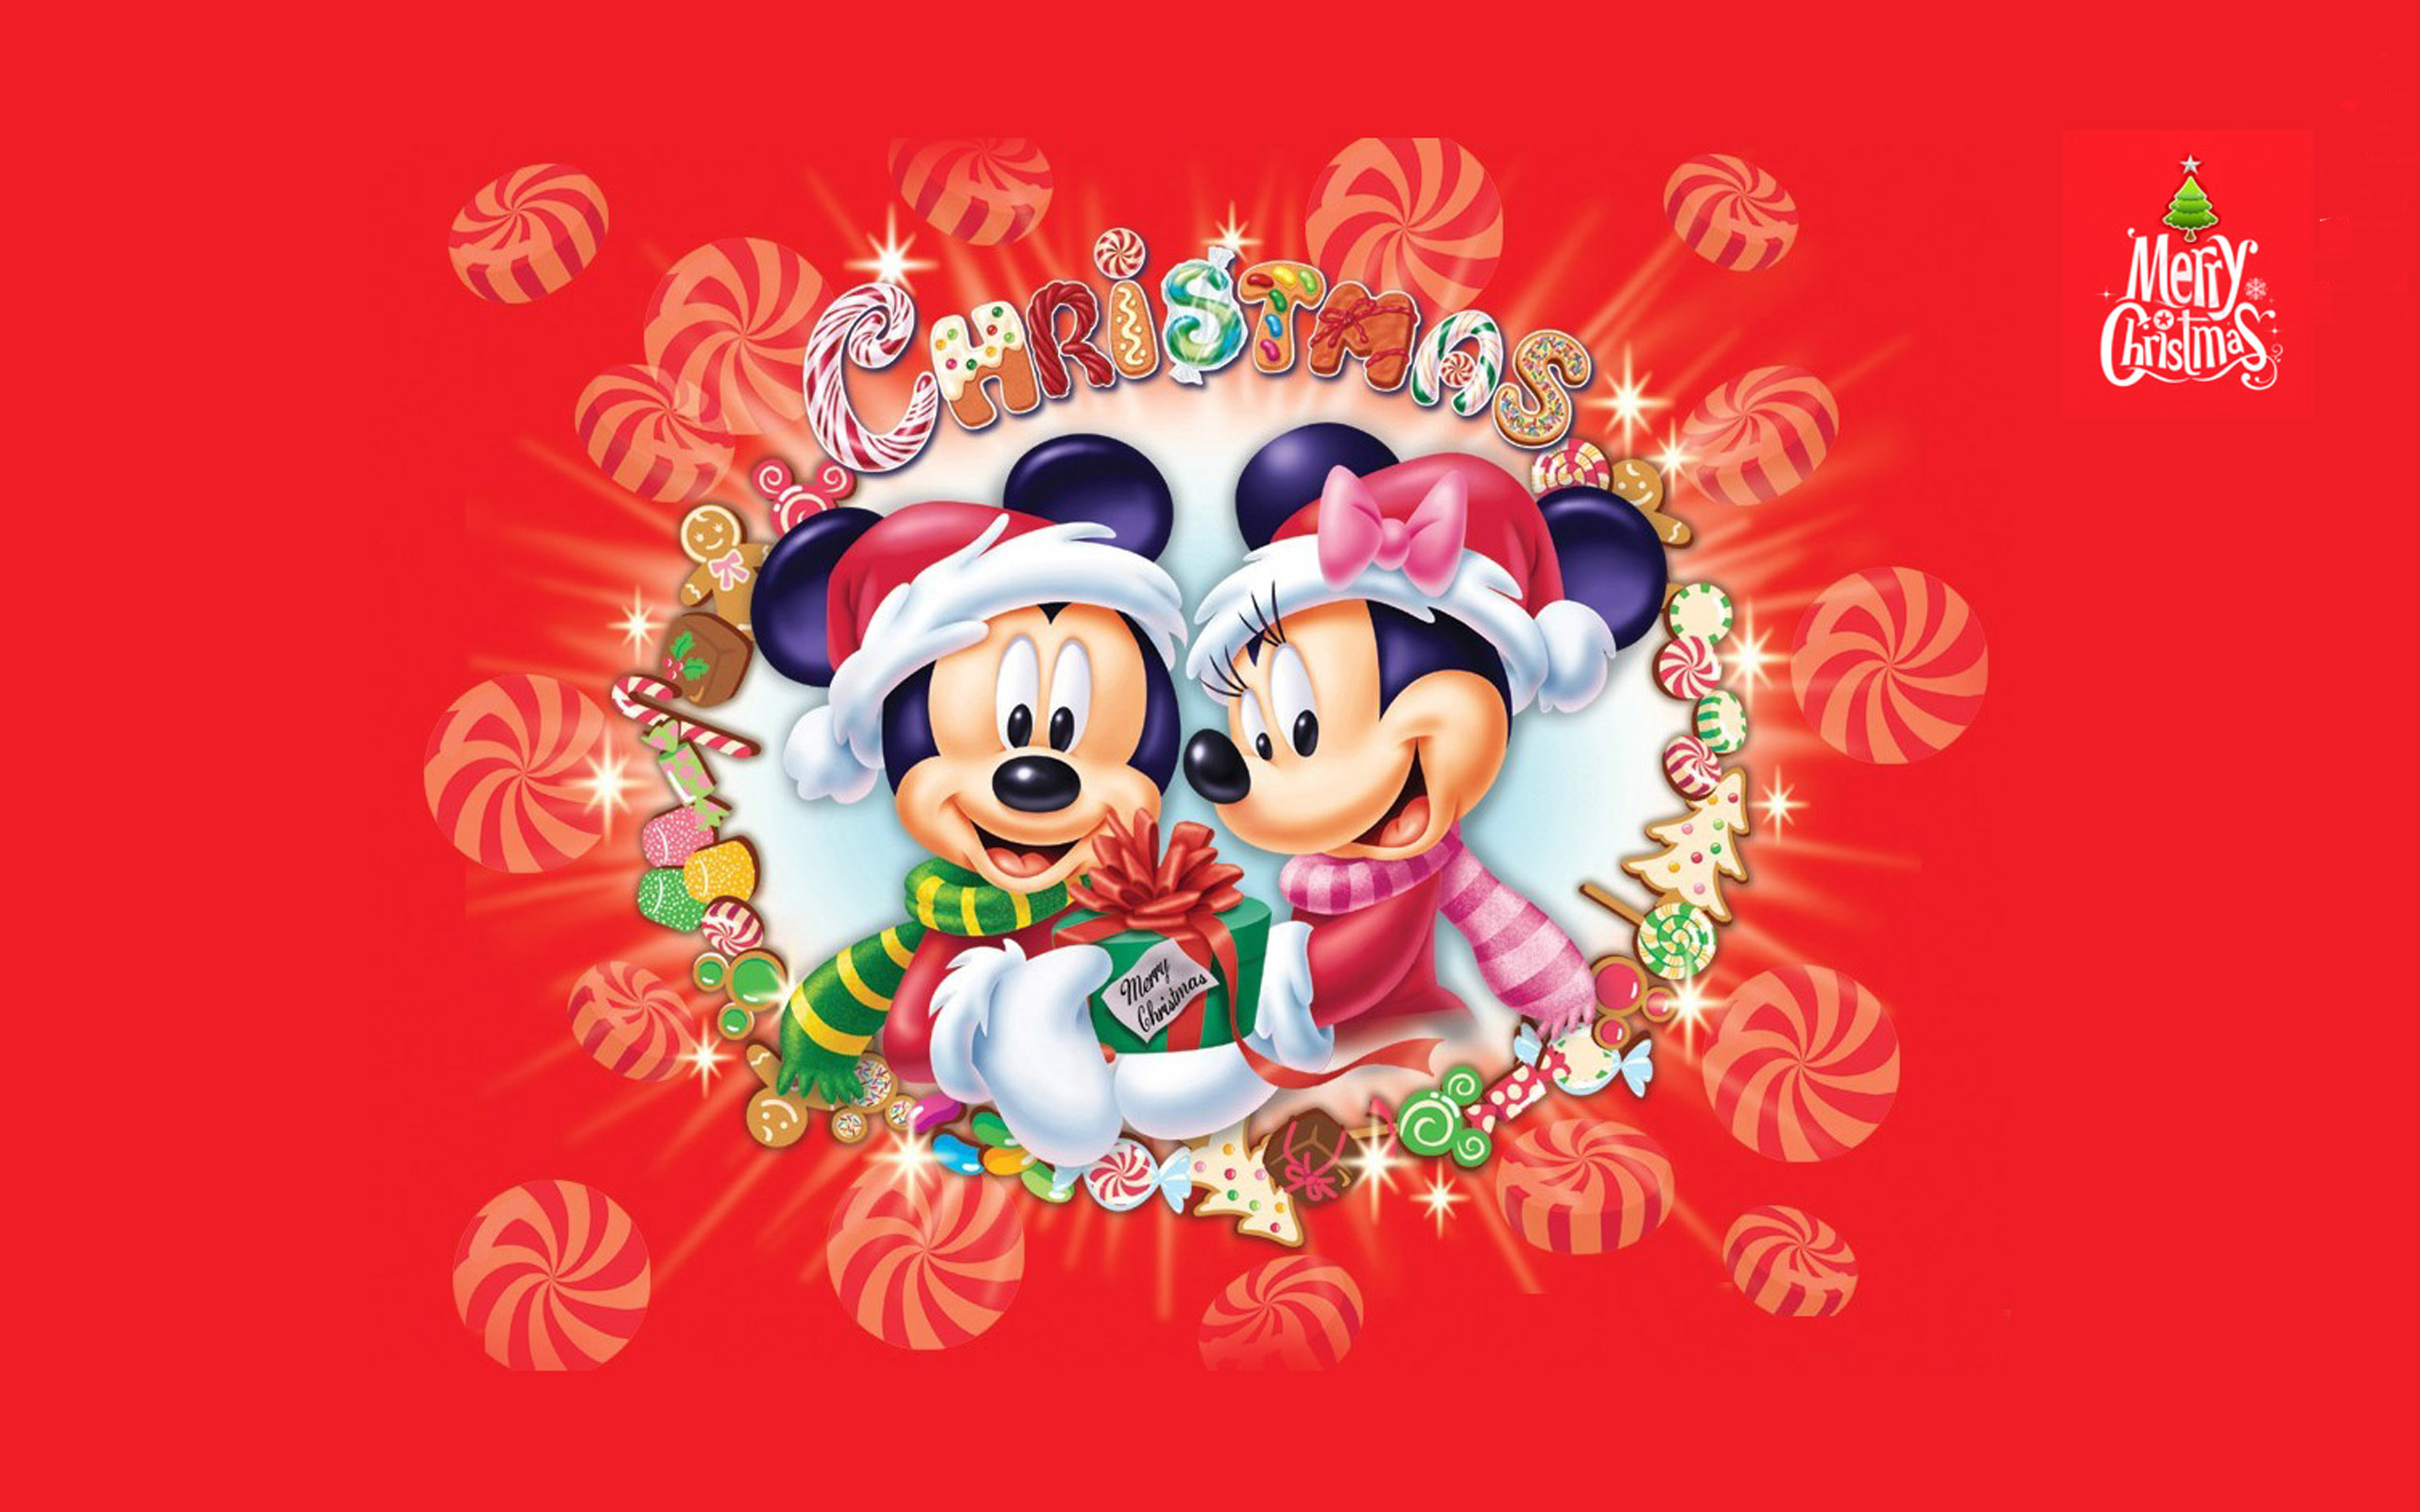 Mickey And Minnie Merry Christmas Disney Hd Wallpaper Widescreen Free Download 2560x1600 Wallpapers13 Com